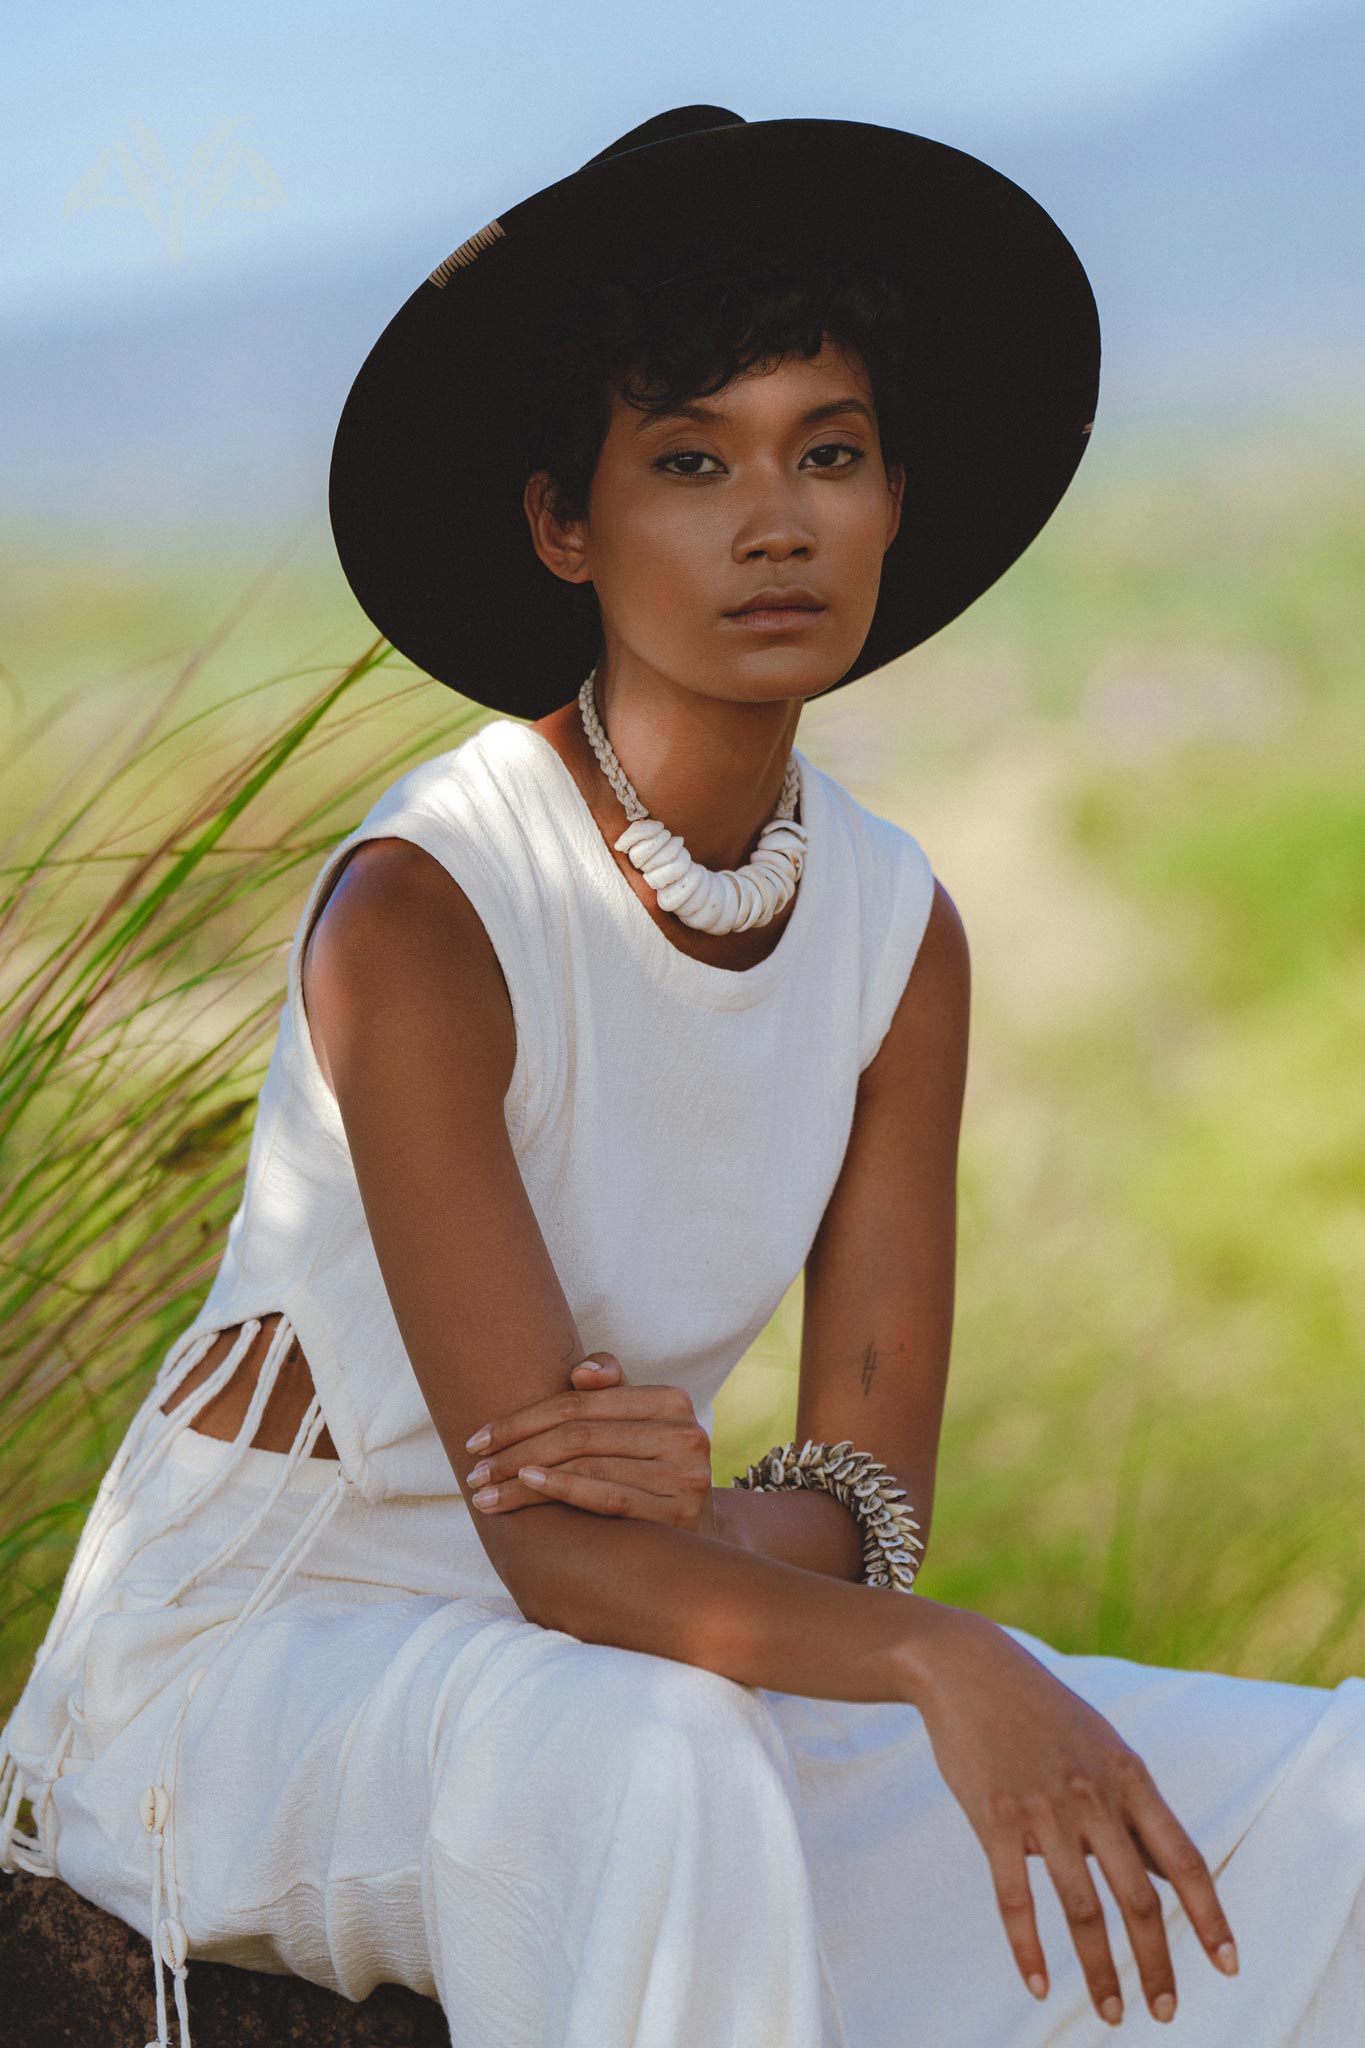 Beat the heat in style with Aya Sacred Wear's Off White Macrame Summer Dress